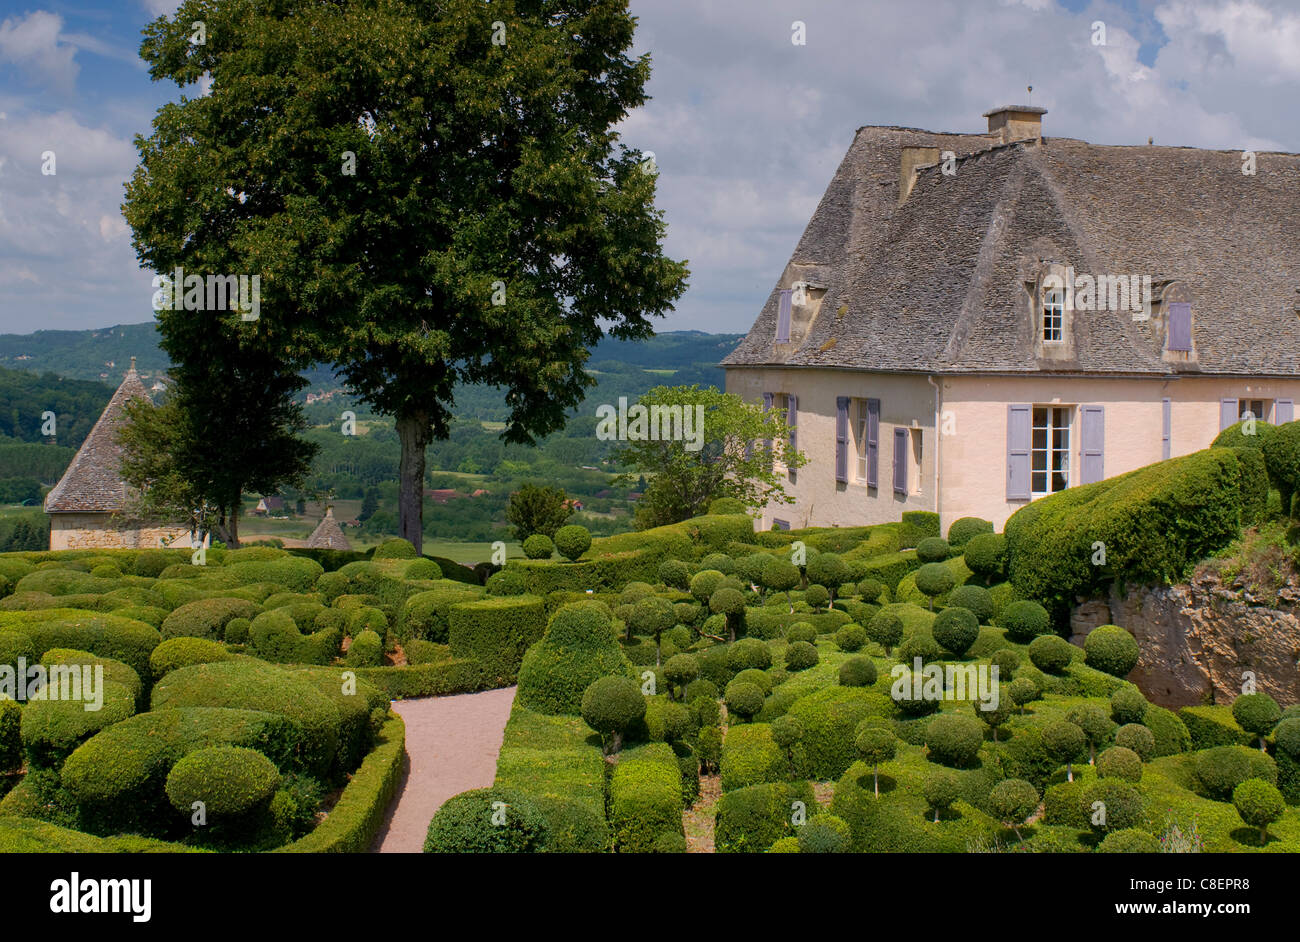 Elaborate topiary surrounding the chateau at Les Jardins de Marqueyssac in Vezac, Dordogne, France Stock Photo